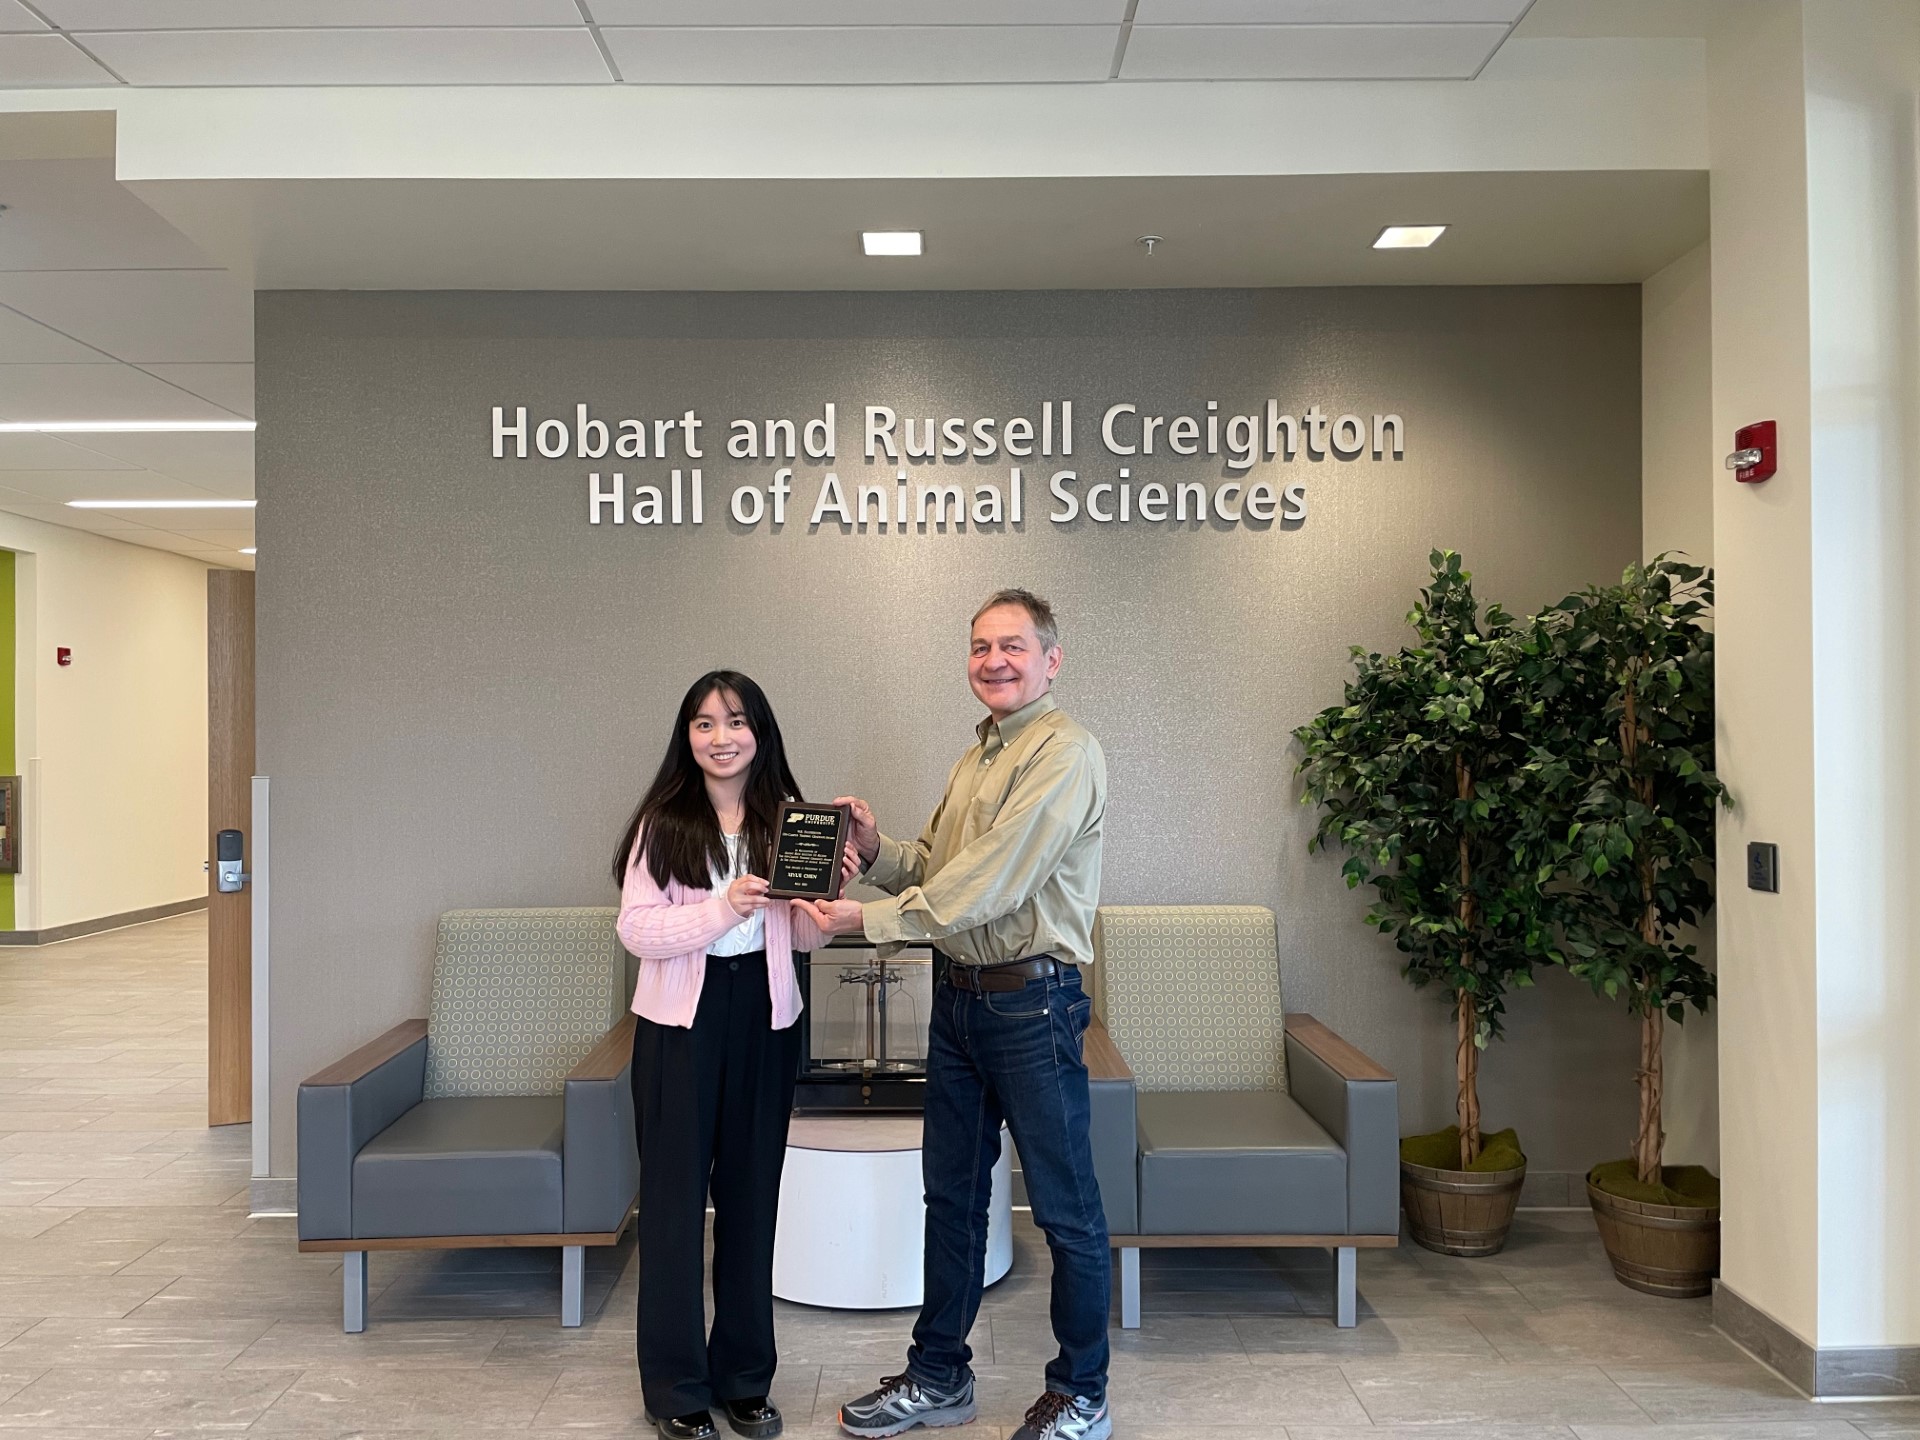 Xiyue (Cici) Chen accepting the award from Dr. Zoltan Machaty.